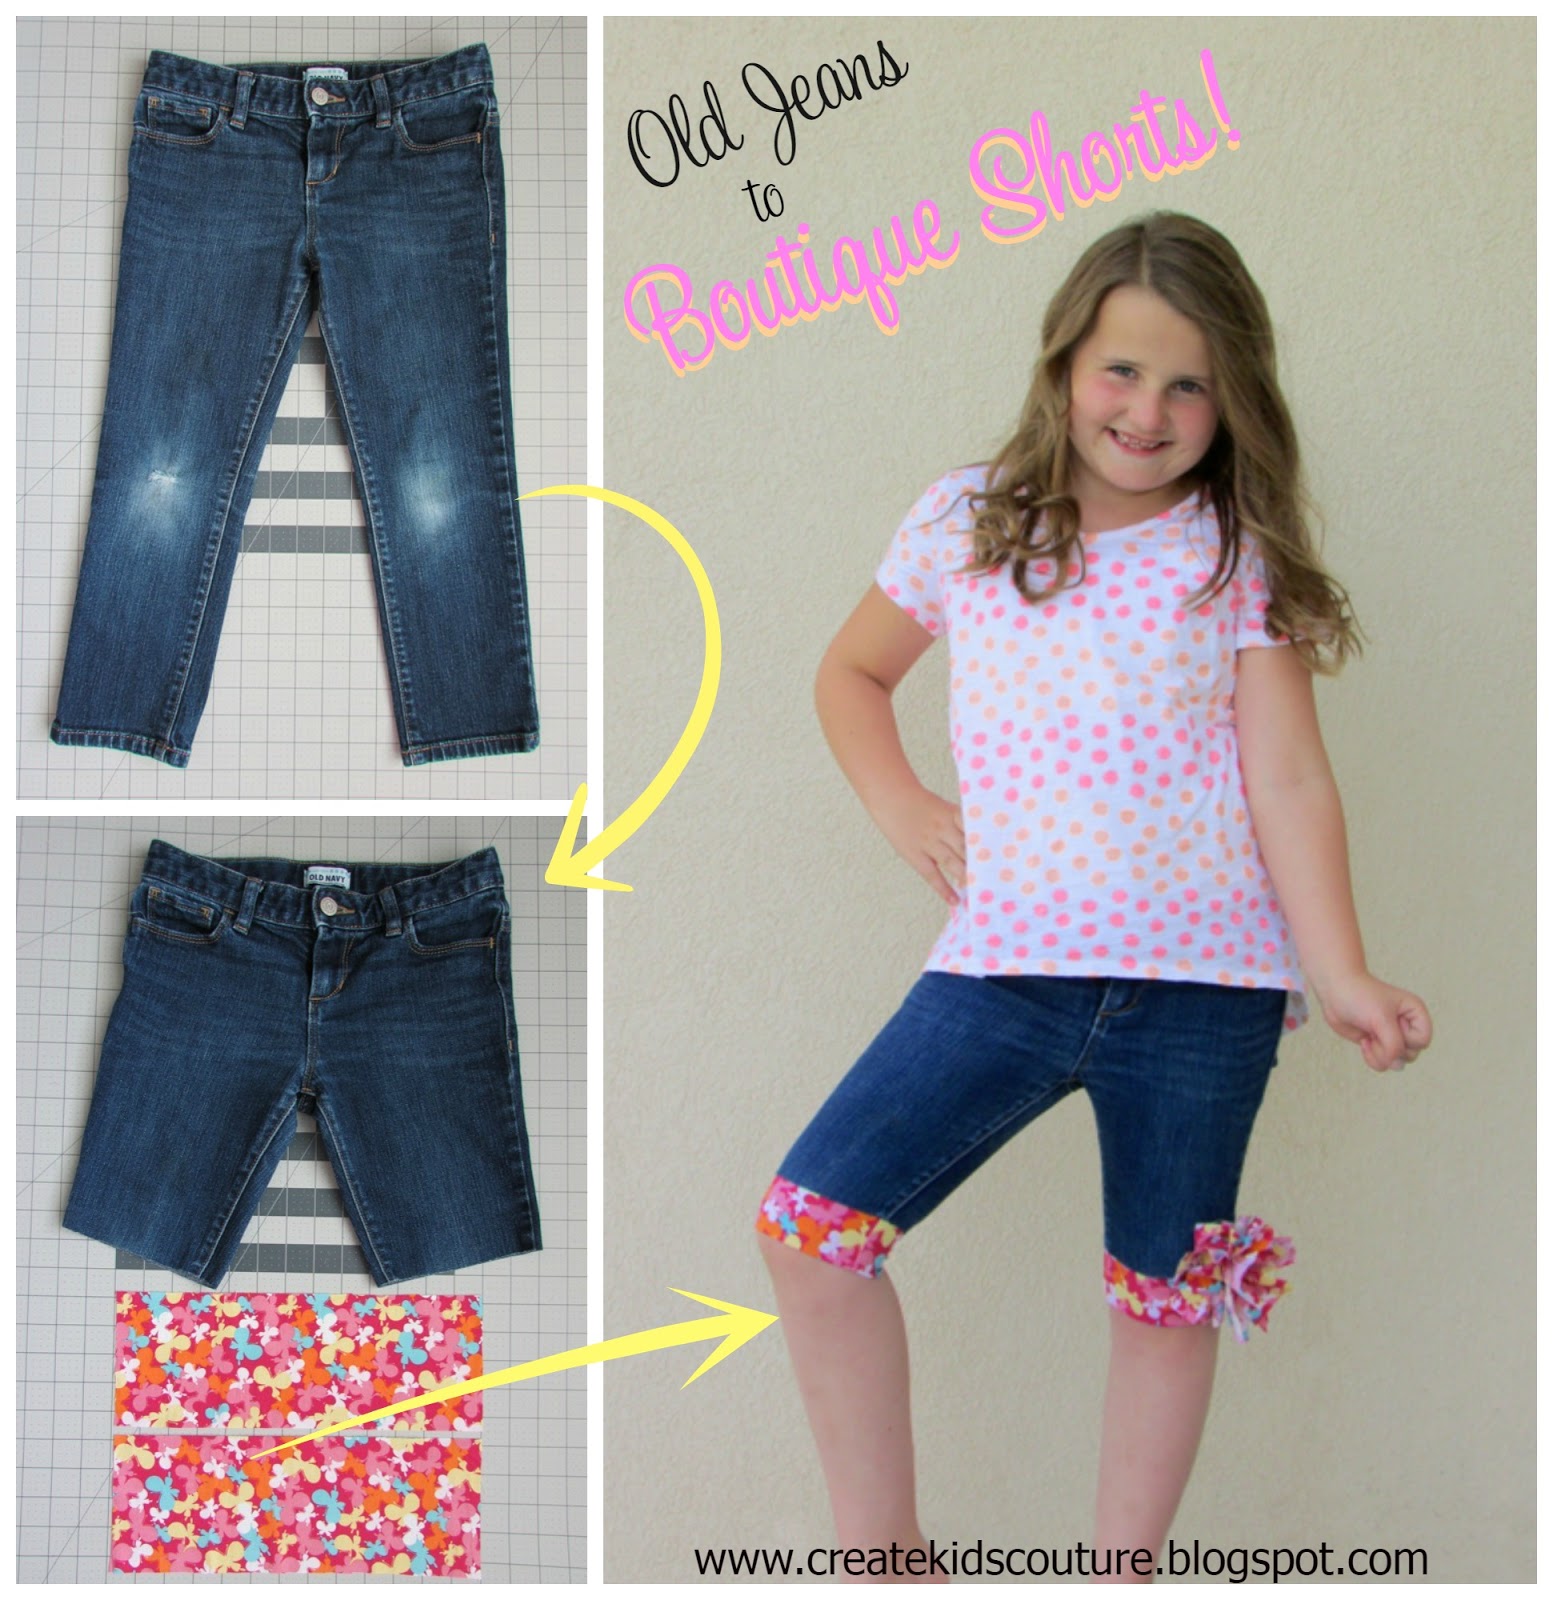 Create Kids Couture: Upcycle Old Jeans into Boutique Shorts